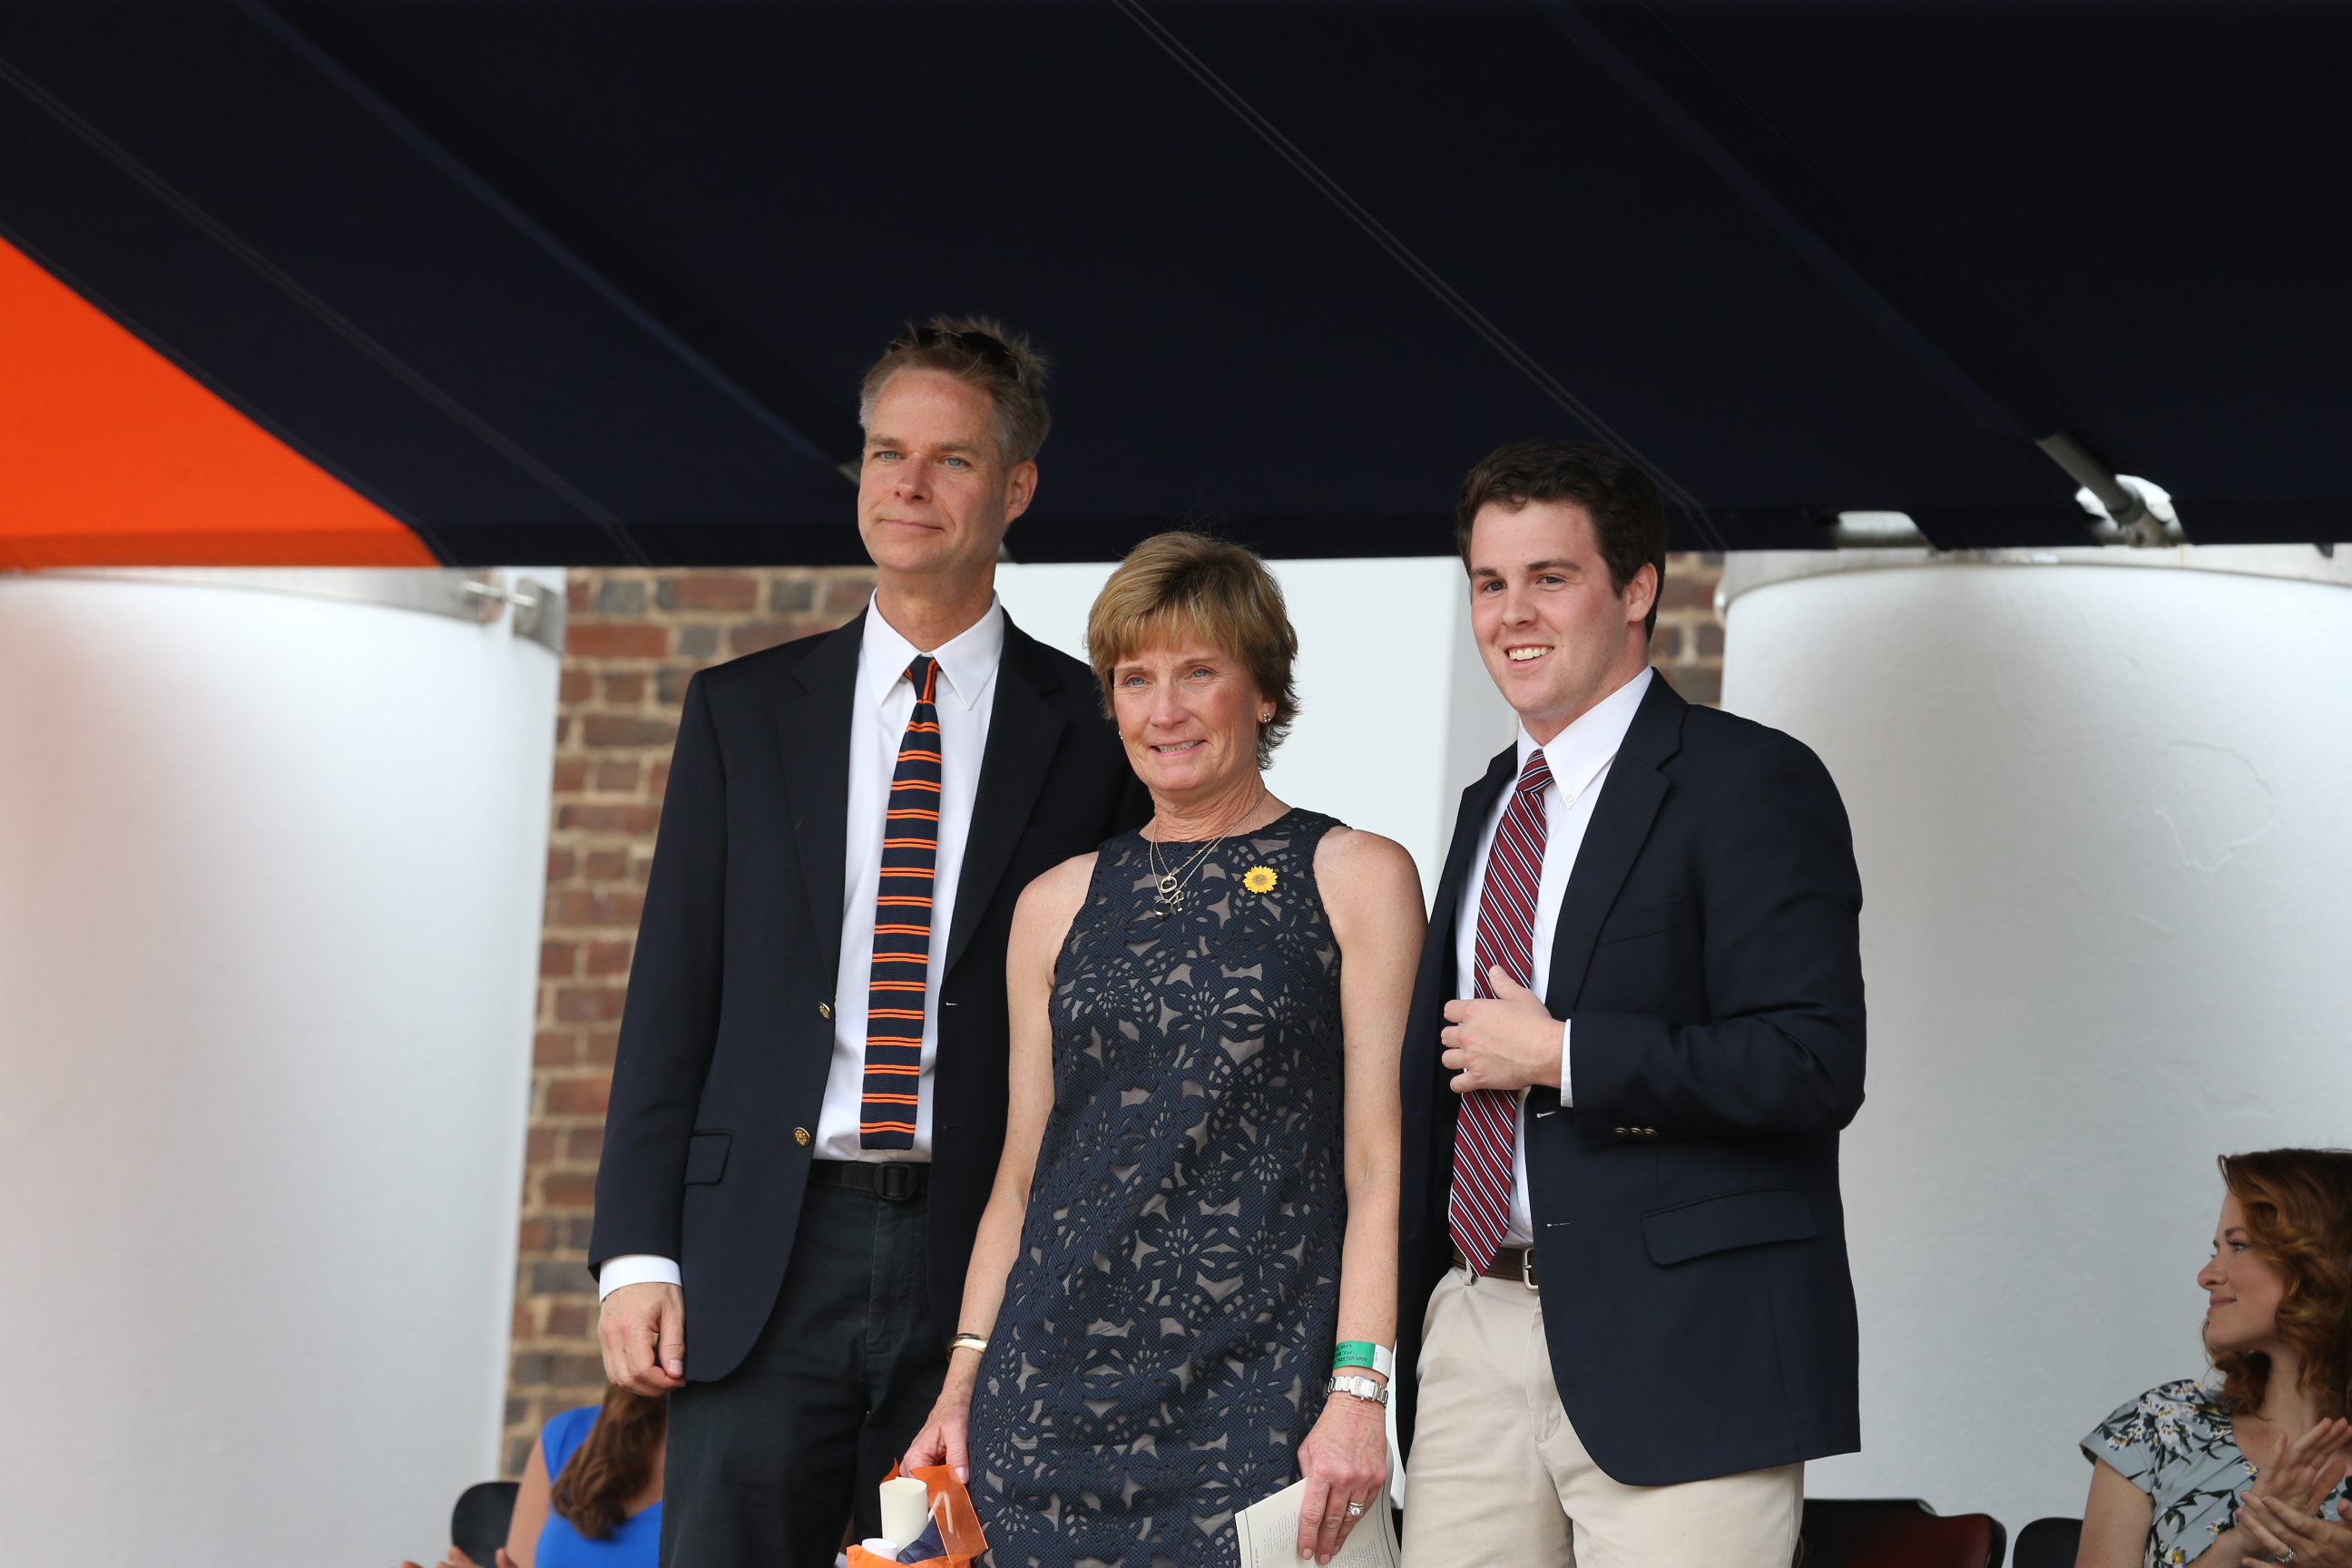  Daniel Judge, right, Margaret Lowe, center, and another man, left, smile for a picture on stage